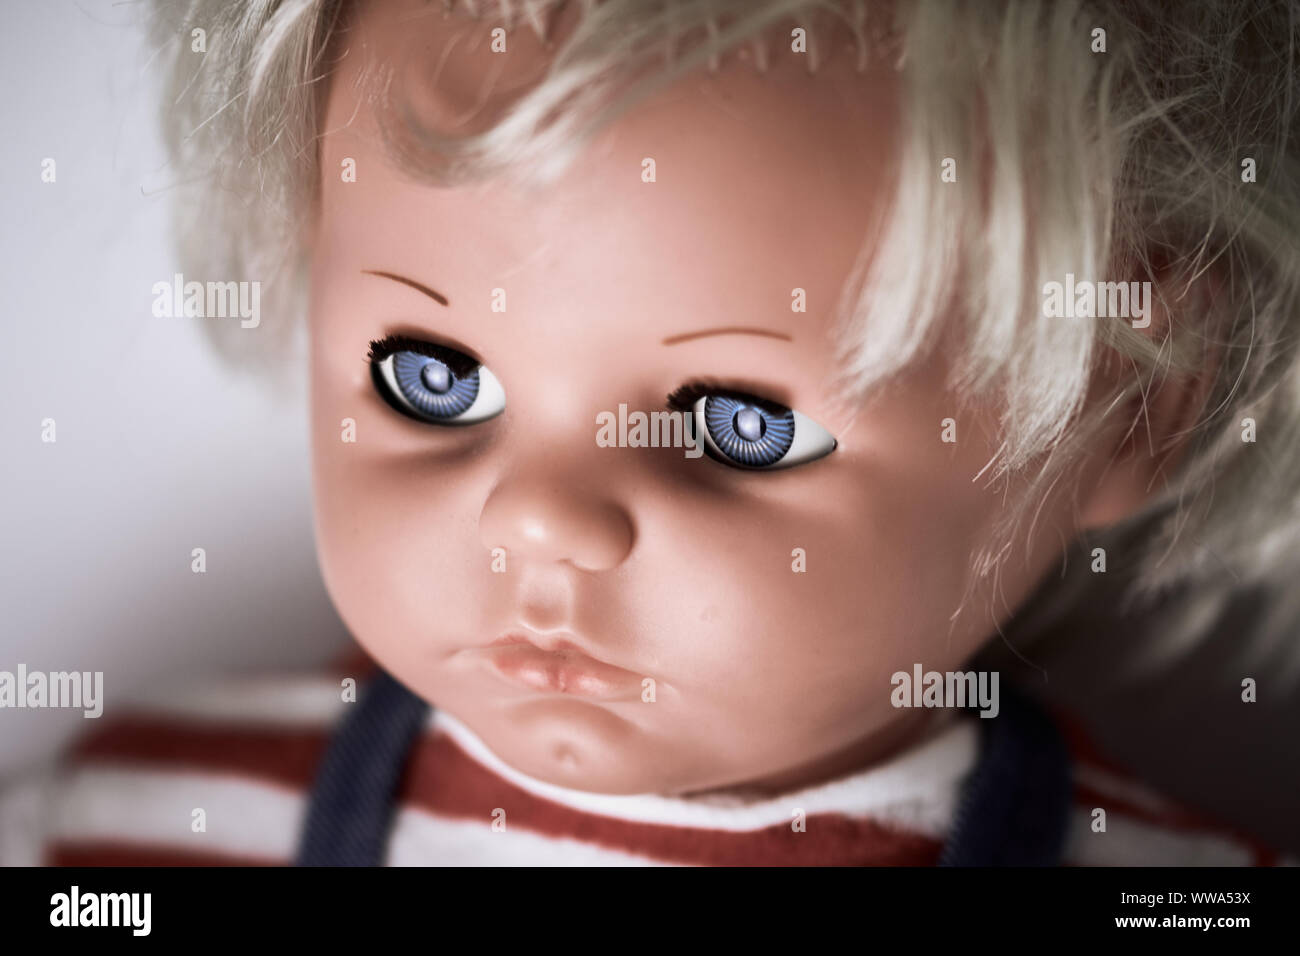 Creepy doll's head. A scary face of a blonde baby doll with blue eyes and a red white striped shirt Stock Photo